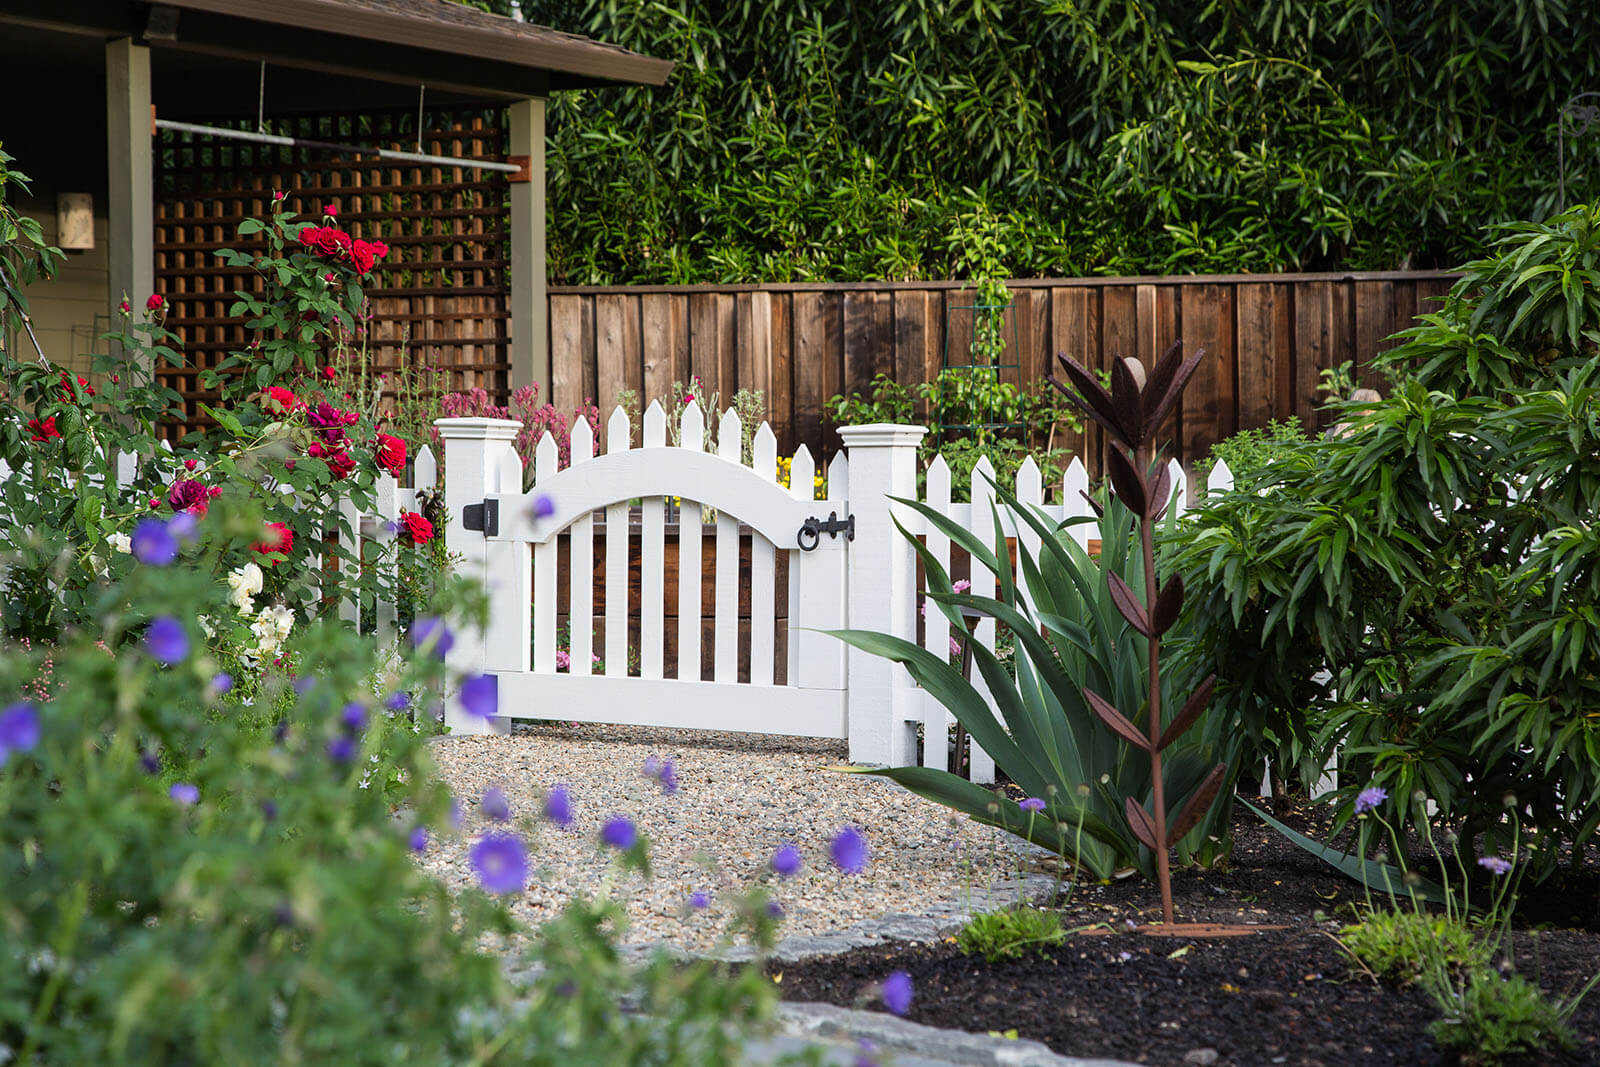 White picket fence bordered entrance to gardening area with shaded trellis